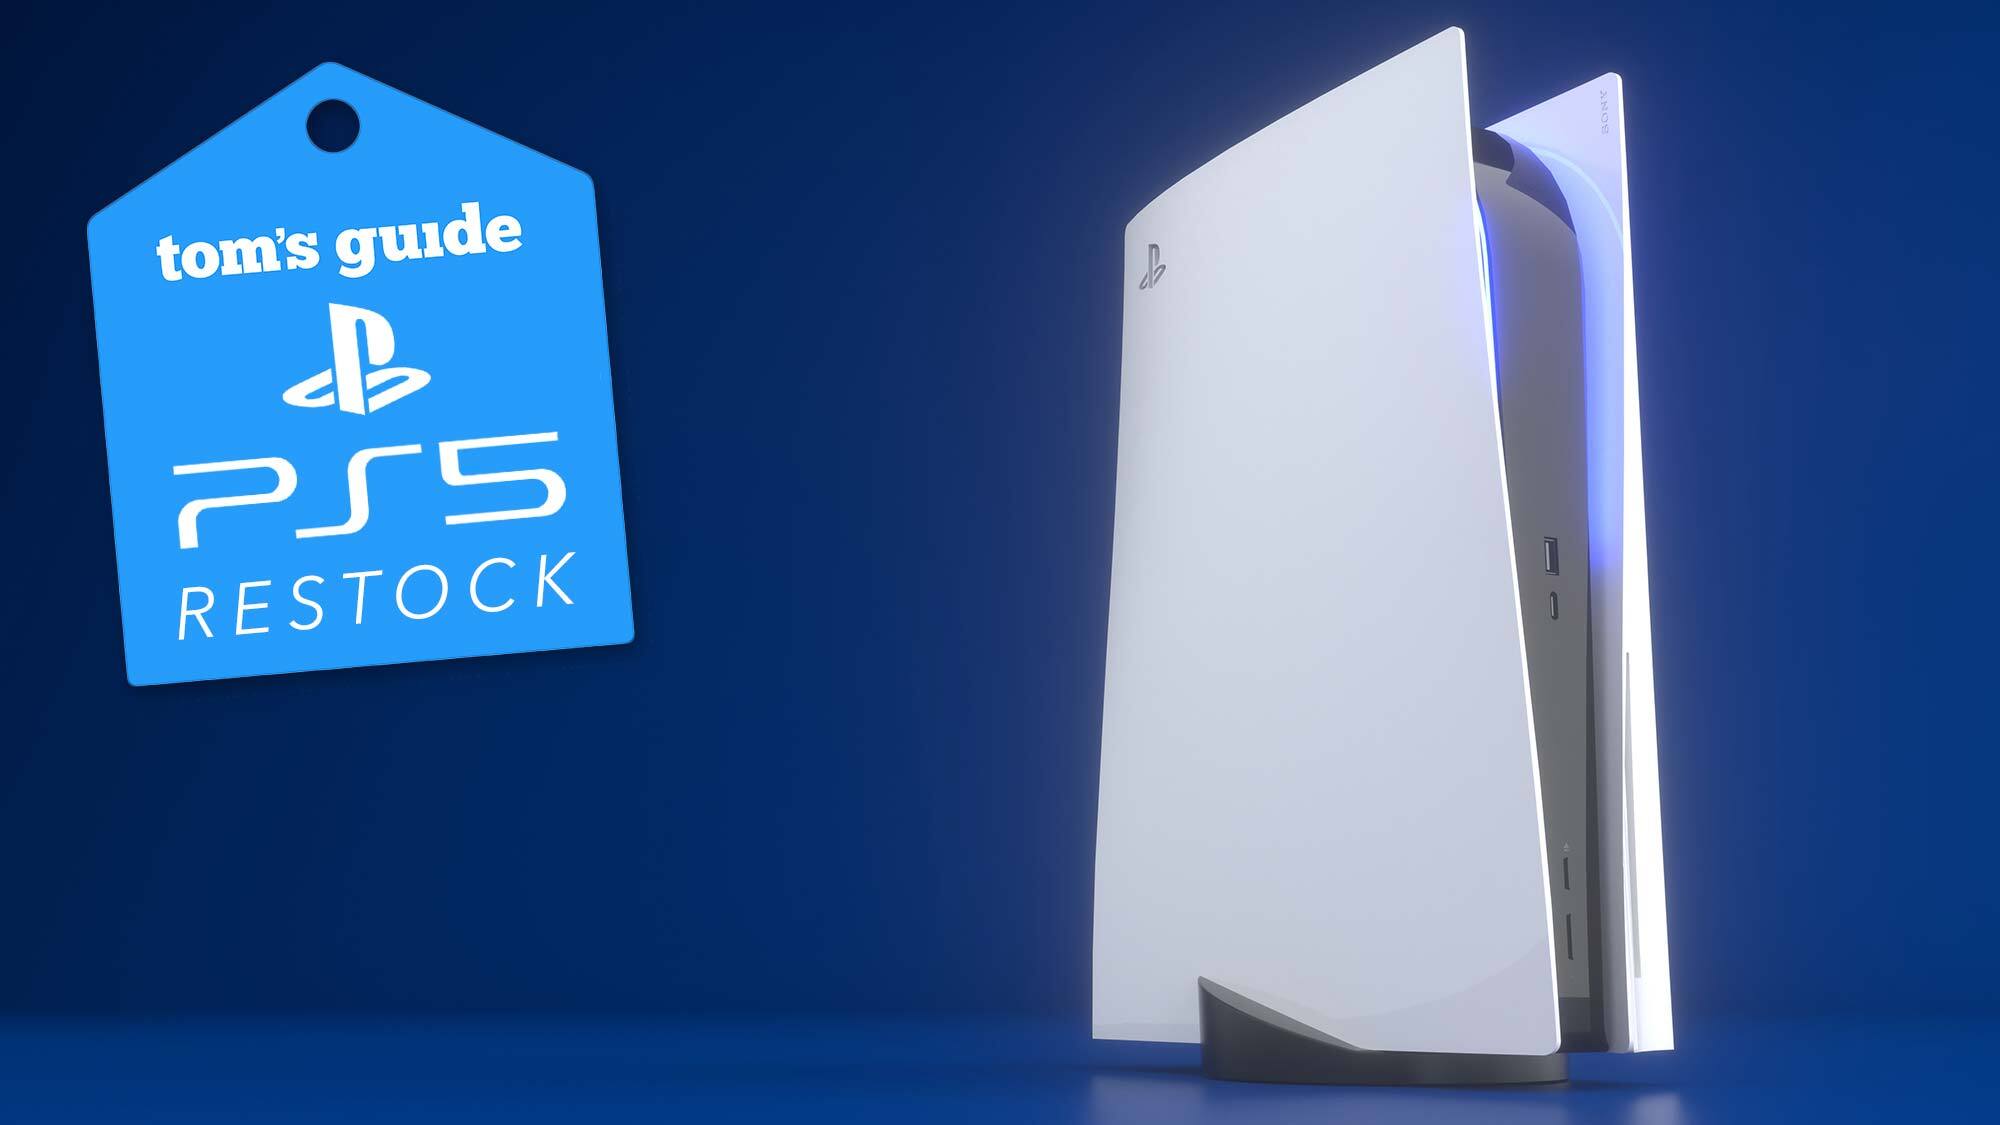 PS5 Restock logo on blue background next to PS5 console